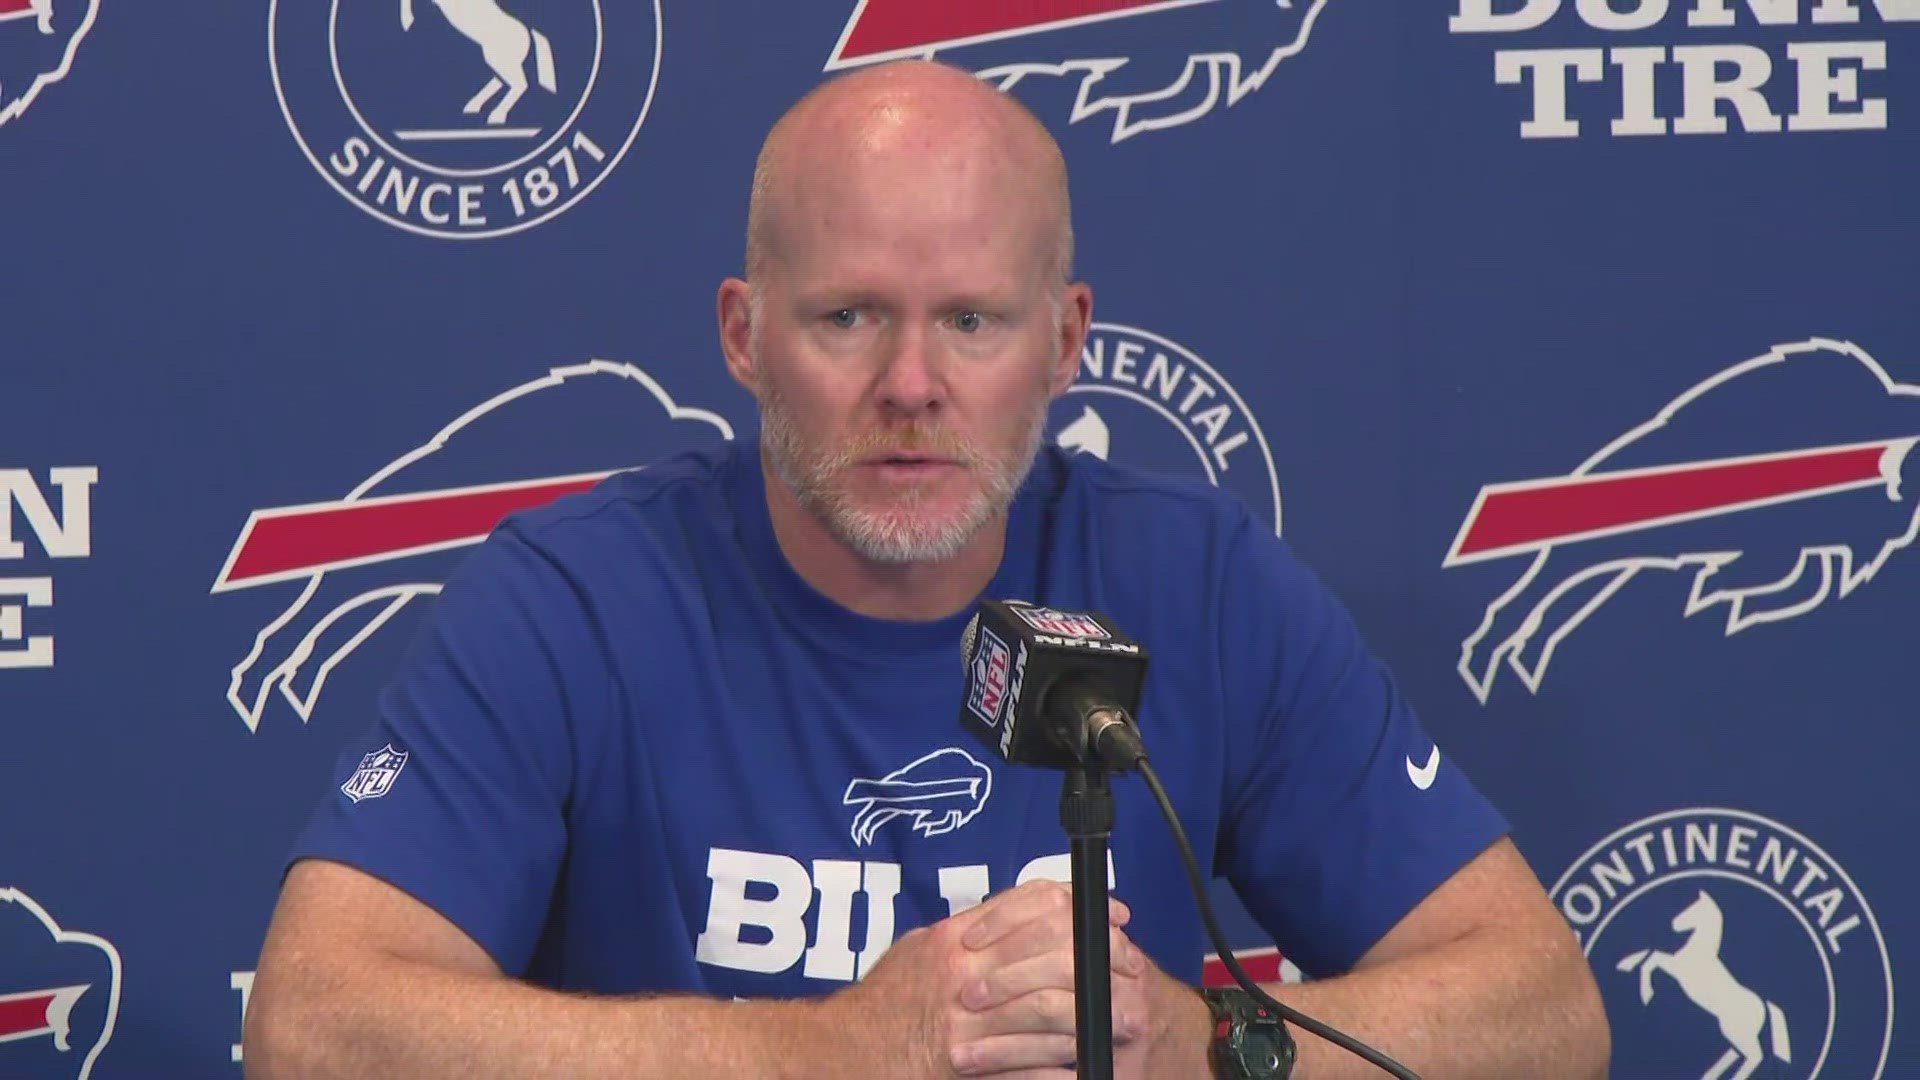 Bills' head coach Sean McDermott discusses who will start in Saturday's game against the Steelers